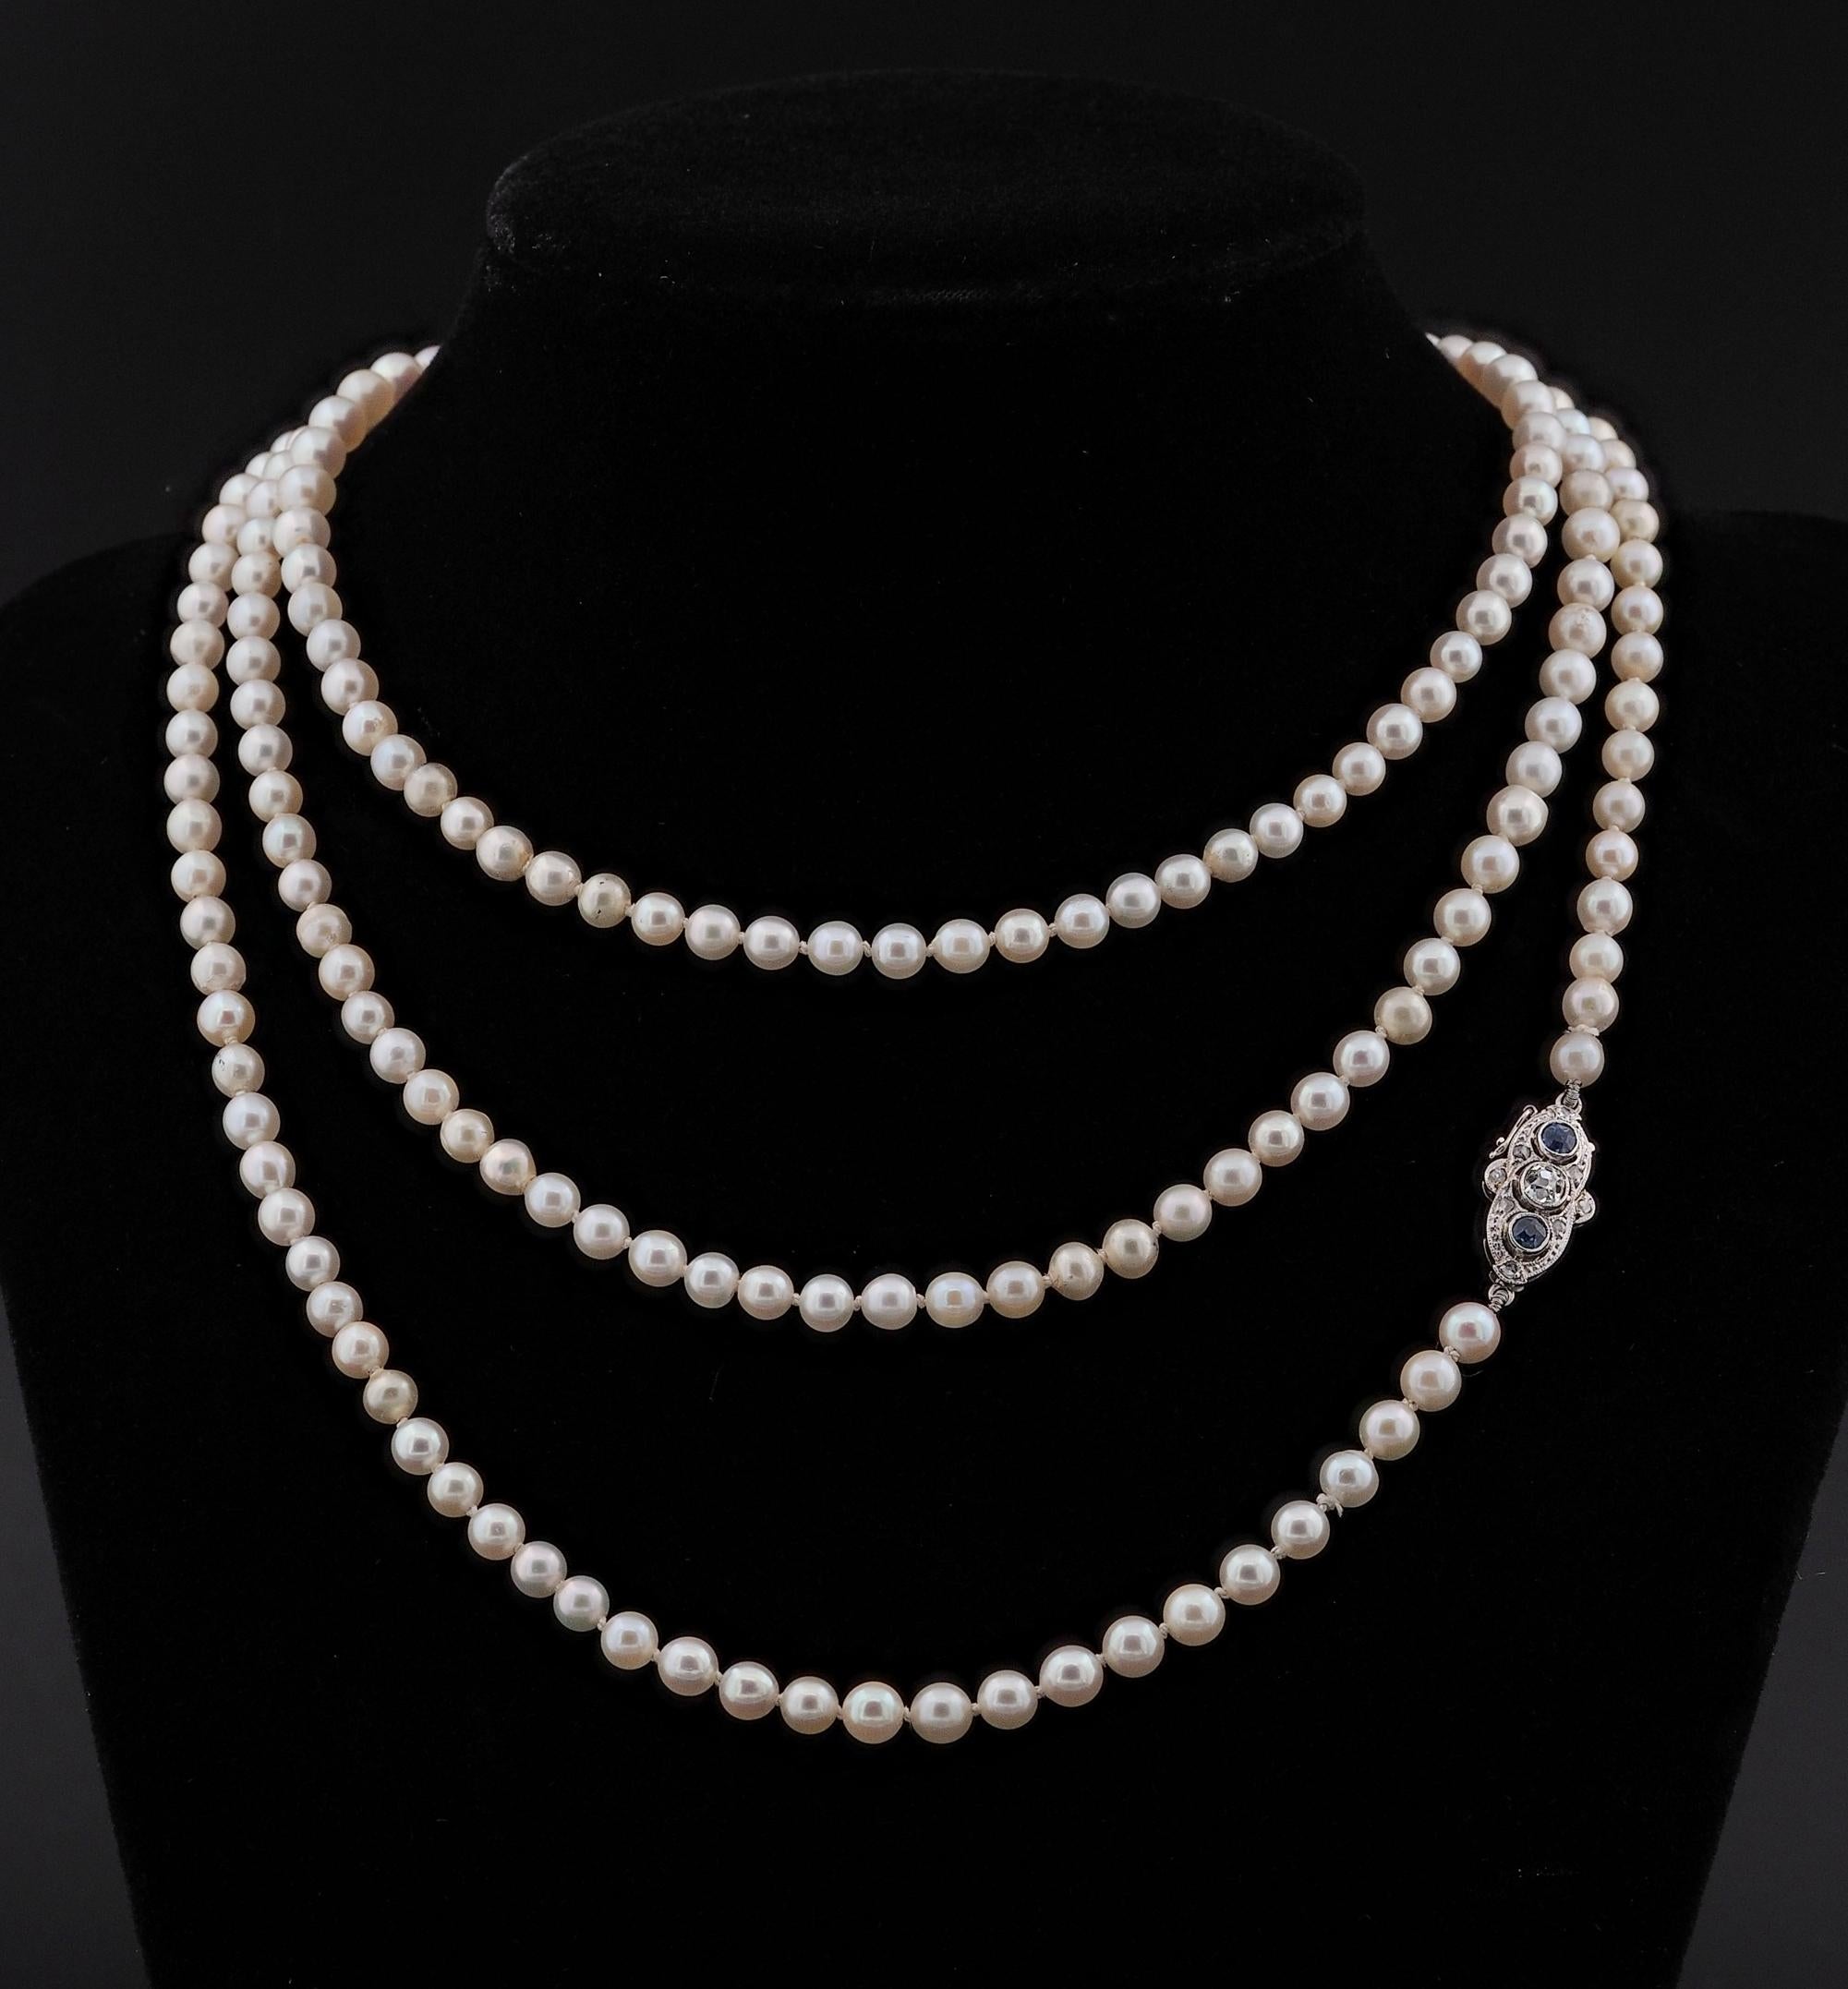 This very charming Art Deco period single strand necklace is 1920 ca.
Comprising one single strand of 5 mm. round in shape cultured salt water Pearls prizing good lustre and silky sheen with subtle white cream colour
Complemented by the classy boat